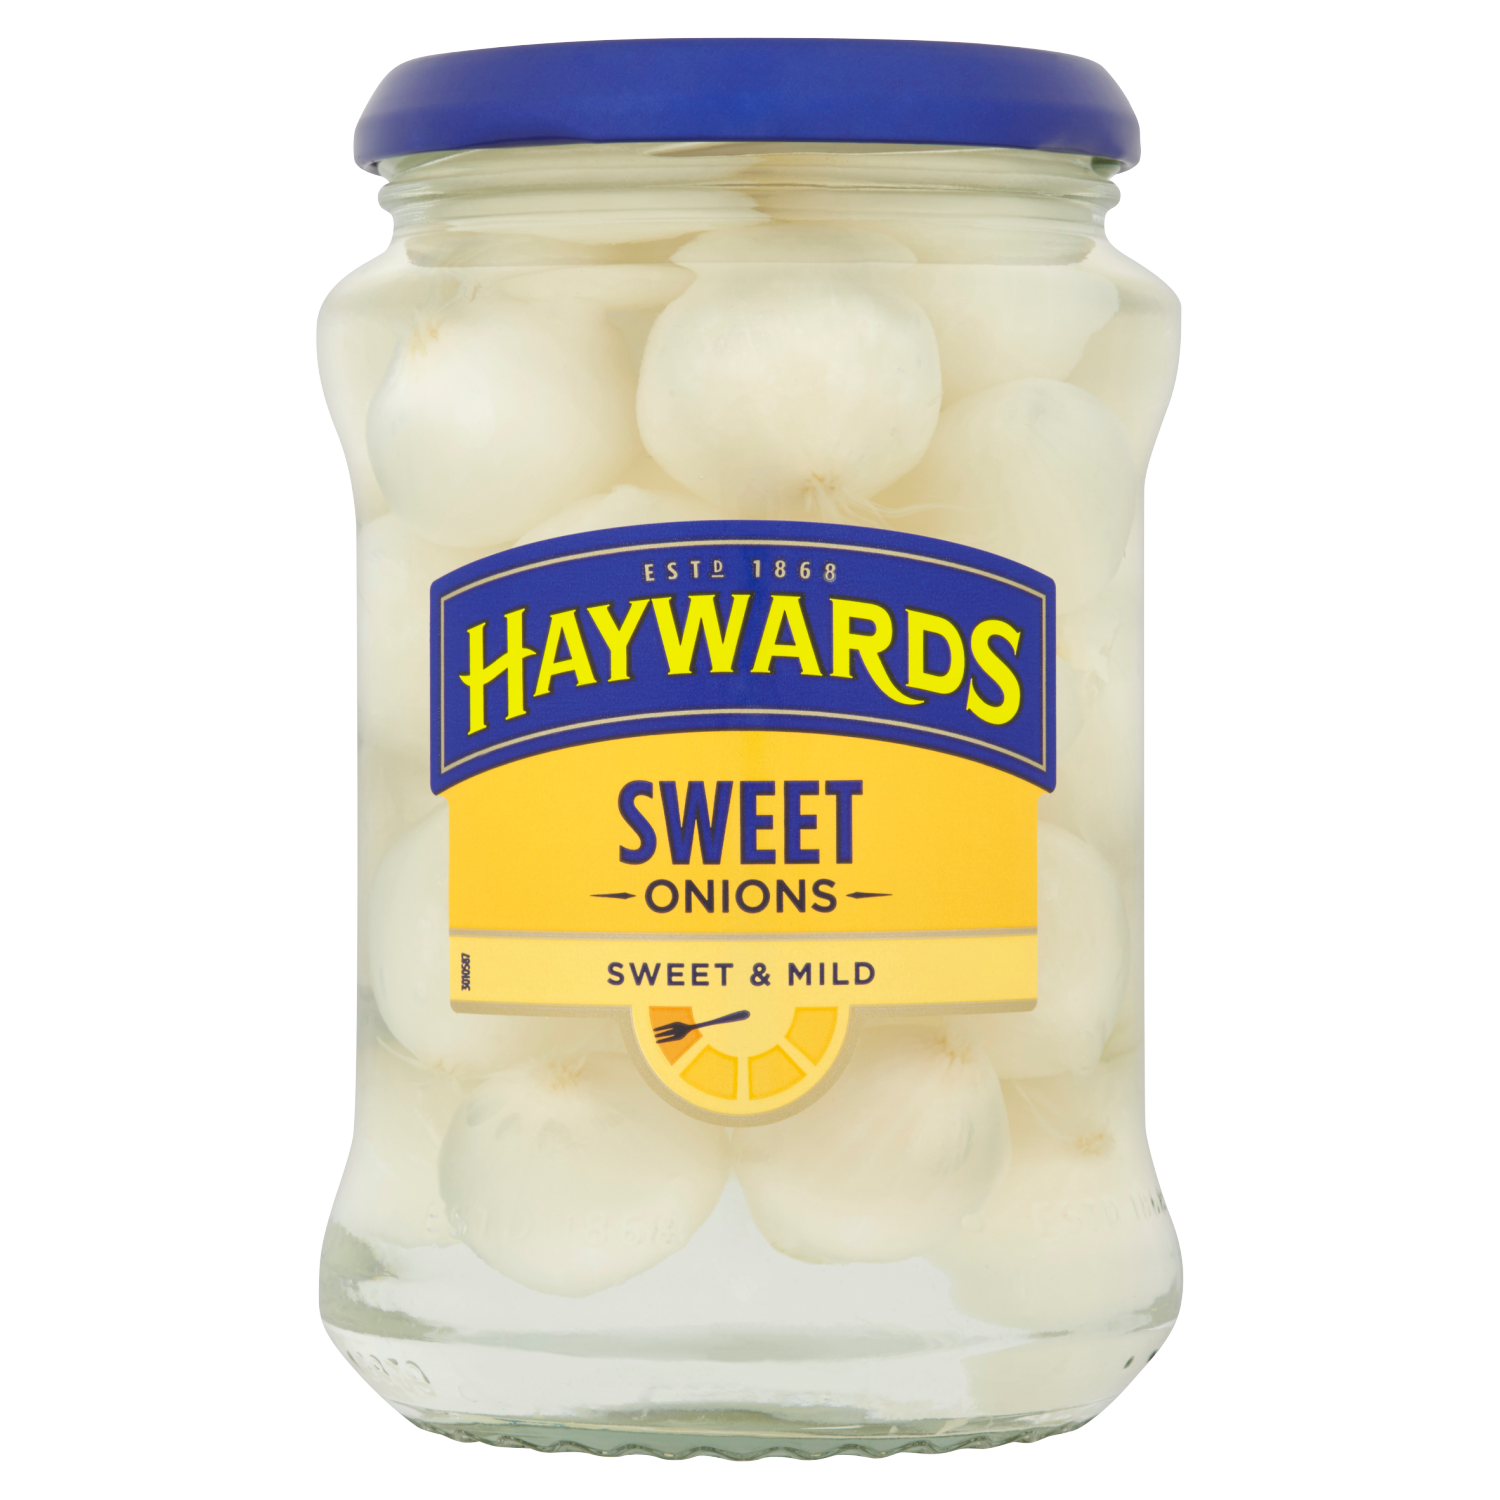 Haywards Onions Sweet and Mild 400g